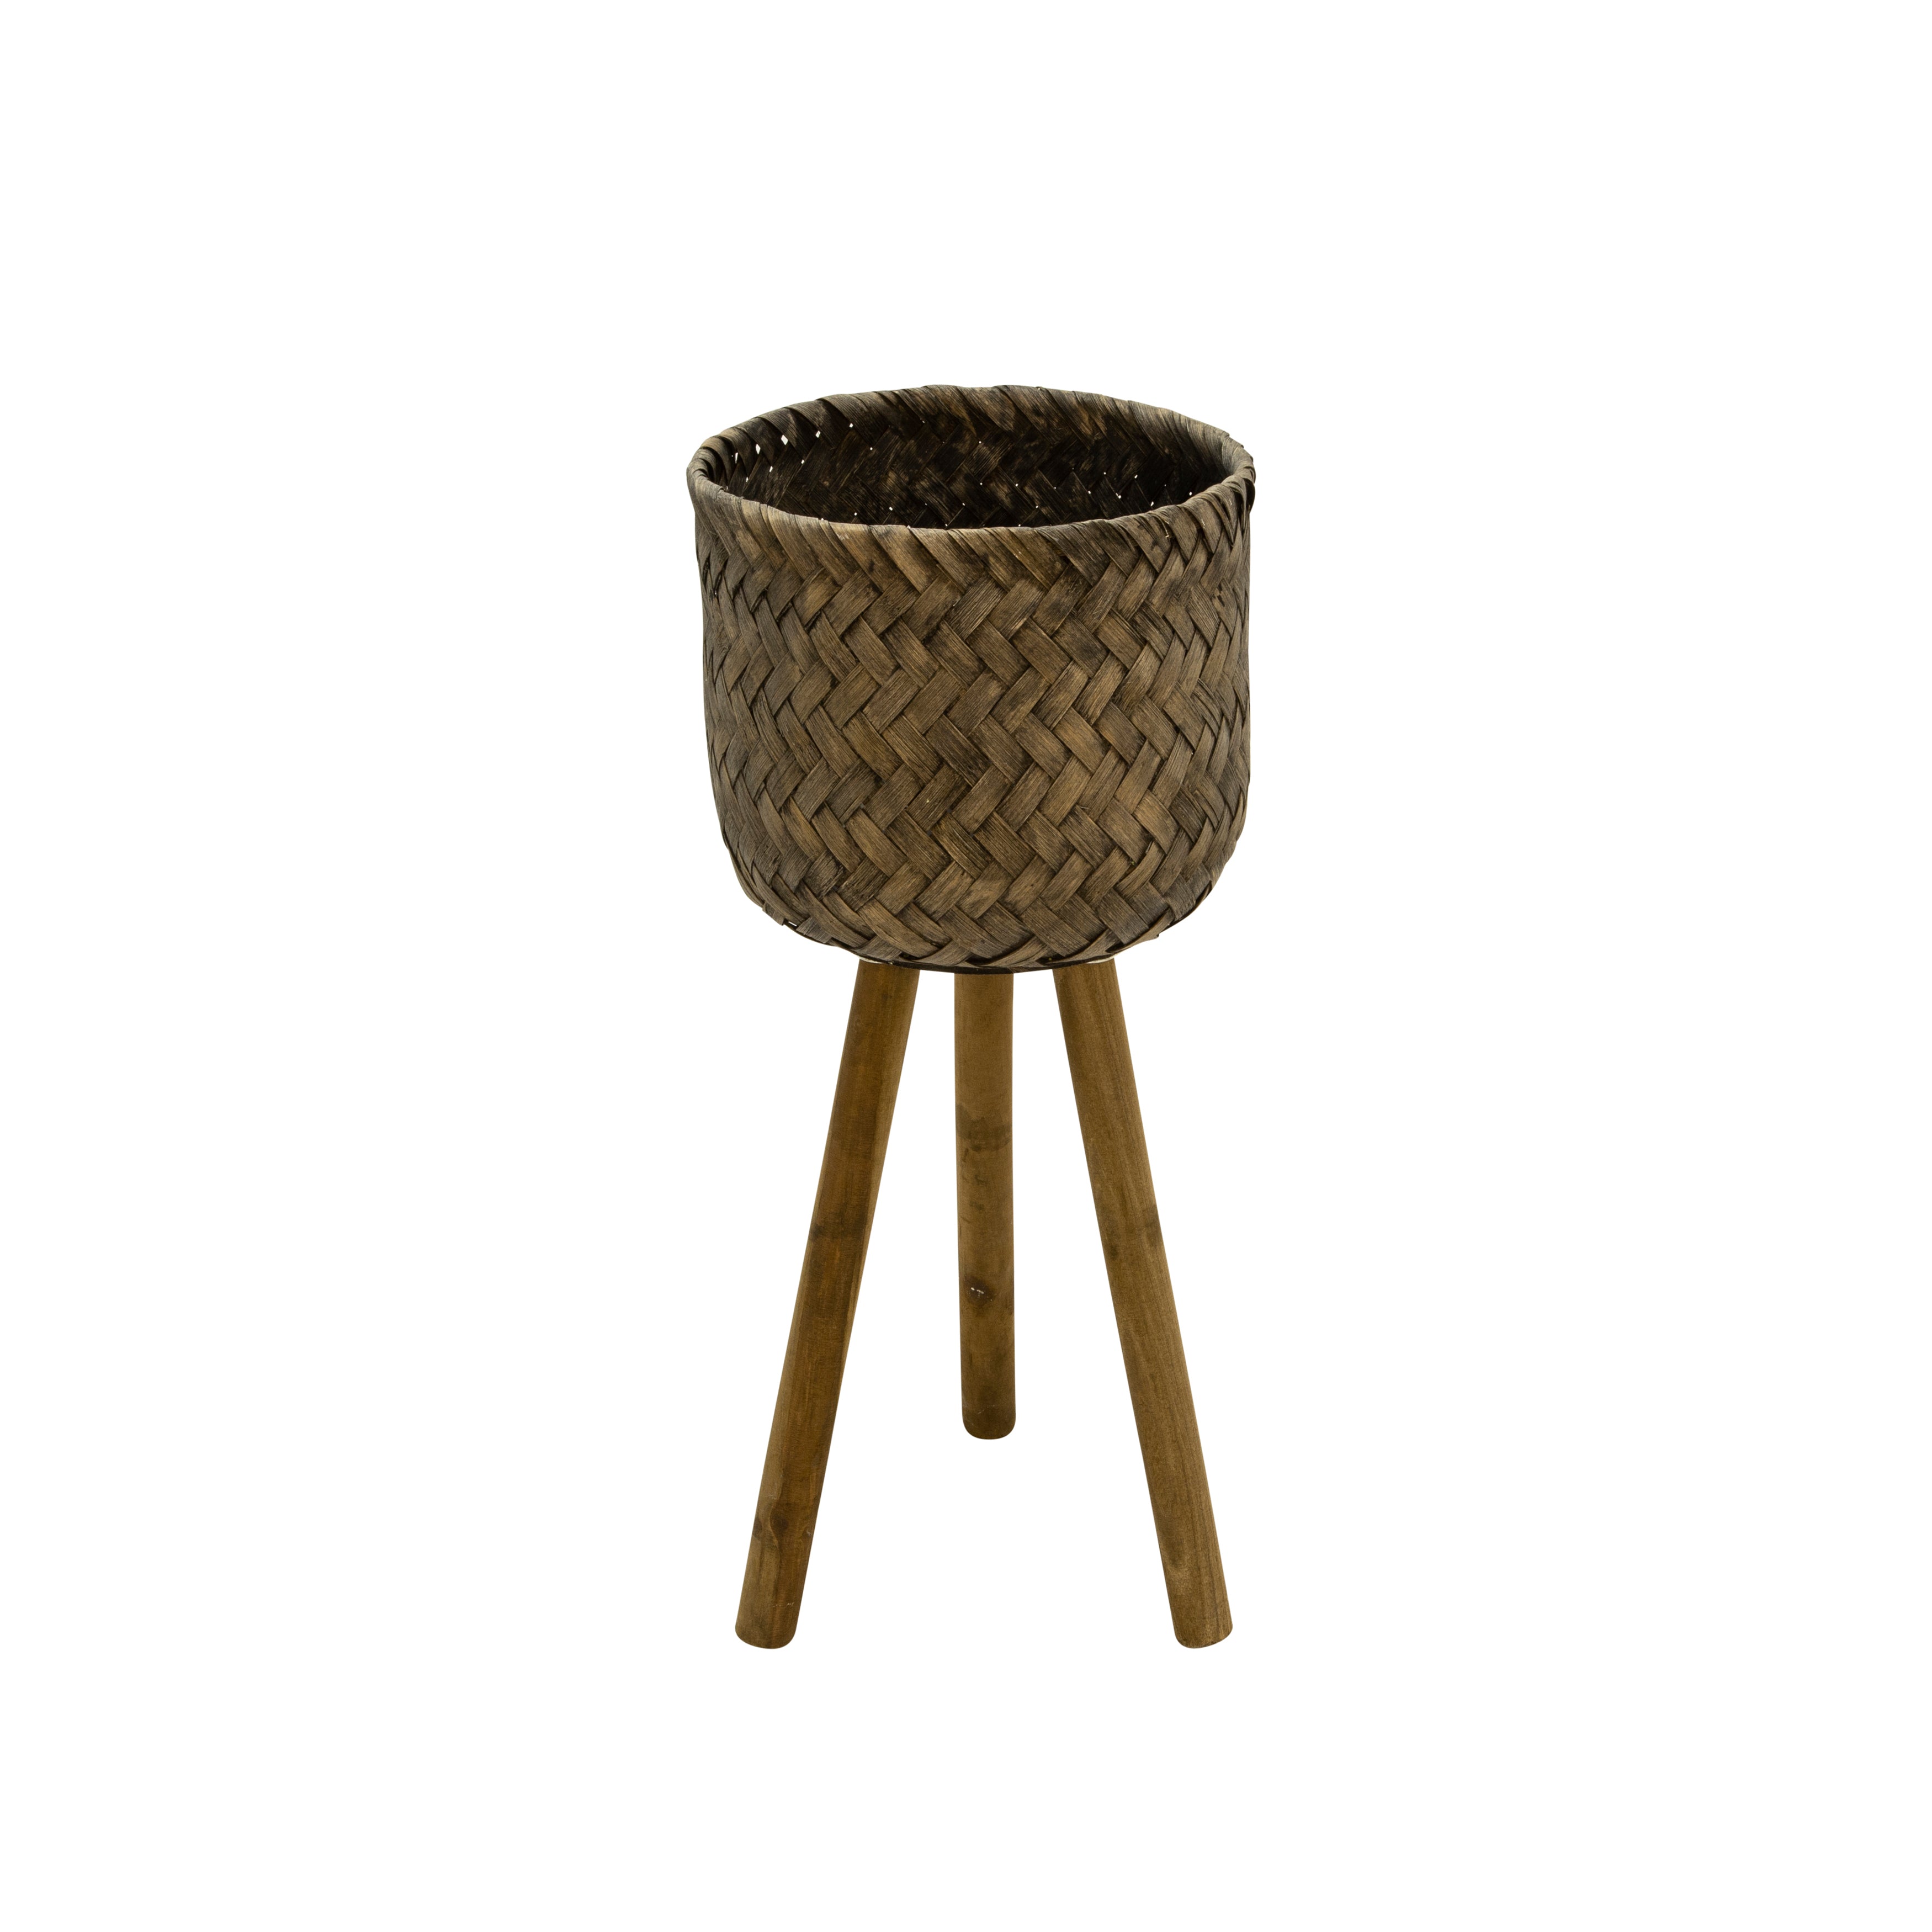 Set of 2 Bamboo Planters On Stands, Planters